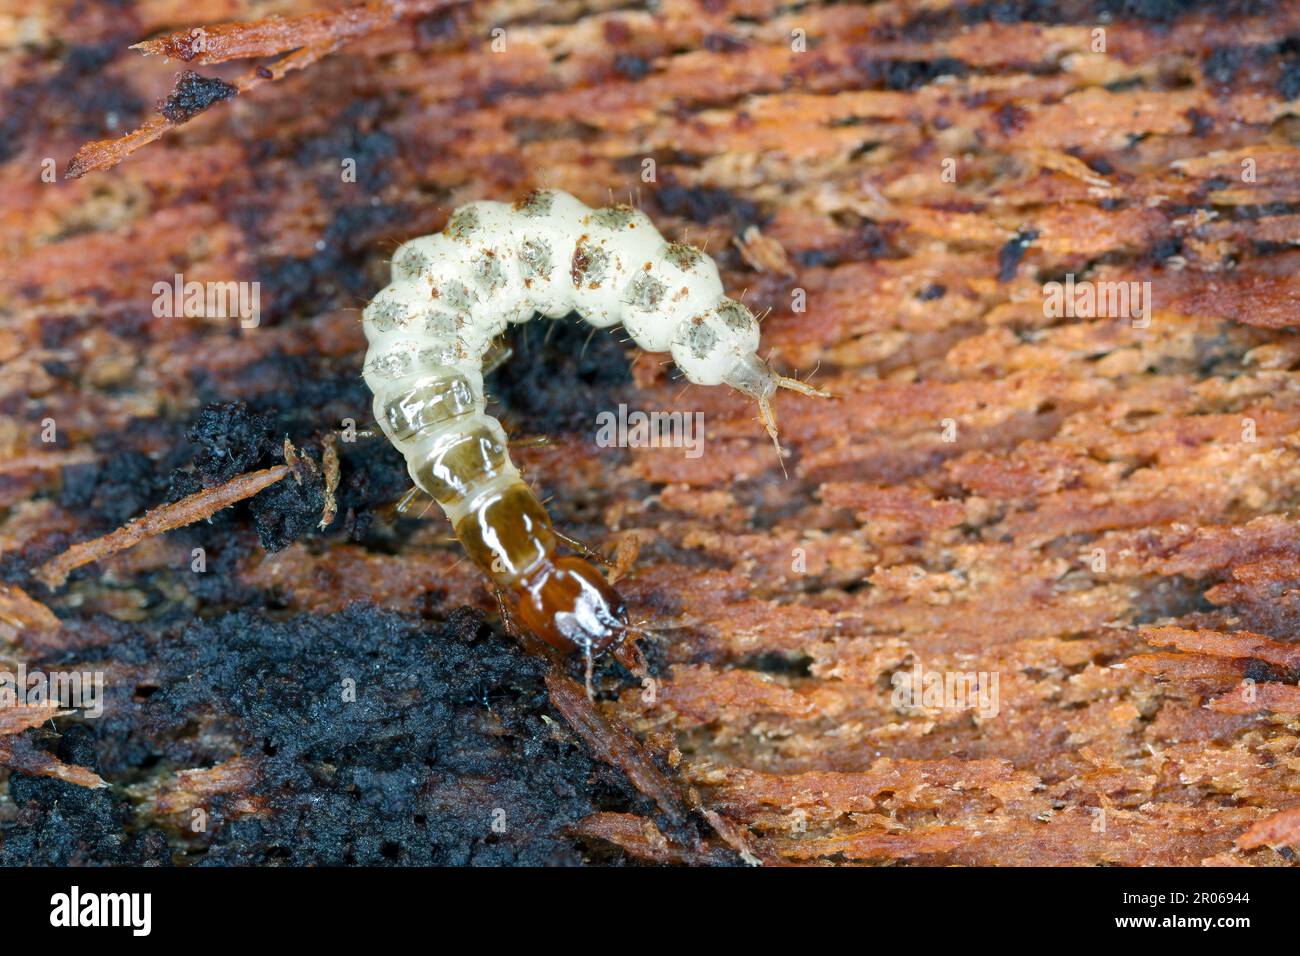 The larva of a beetle of the family Staphylinidae, rove beetles under the bark of a tree. Stock Photo